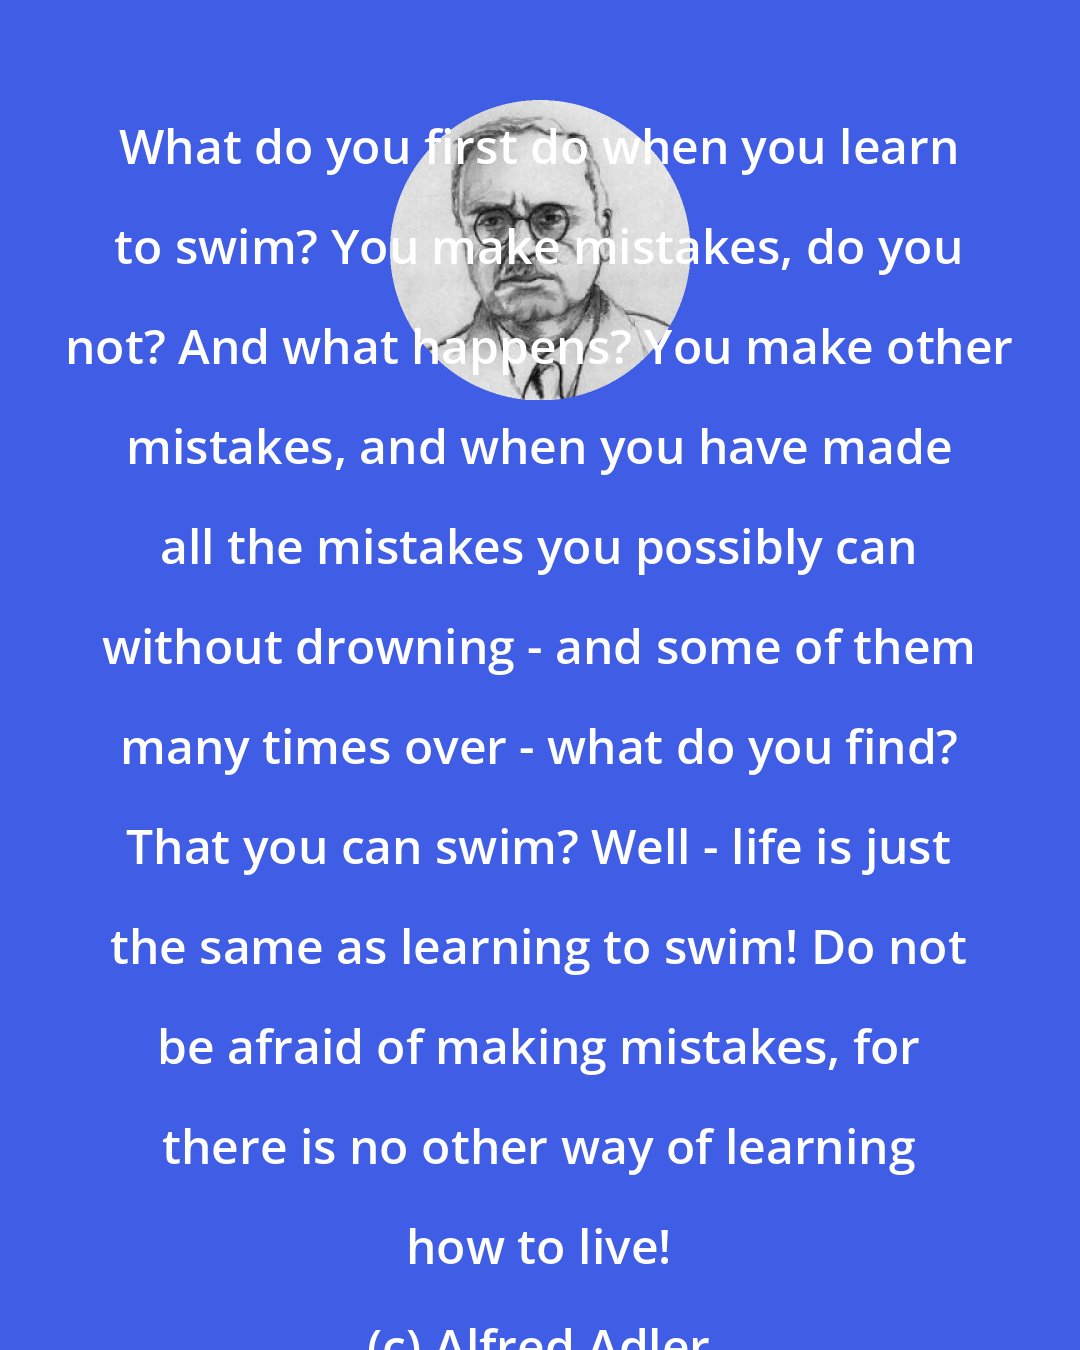 Alfred Adler: What do you first do when you learn to swim? You make mistakes, do you not? And what happens? You make other mistakes, and when you have made all the mistakes you possibly can without drowning - and some of them many times over - what do you find? That you can swim? Well - life is just the same as learning to swim! Do not be afraid of making mistakes, for there is no other way of learning how to live!